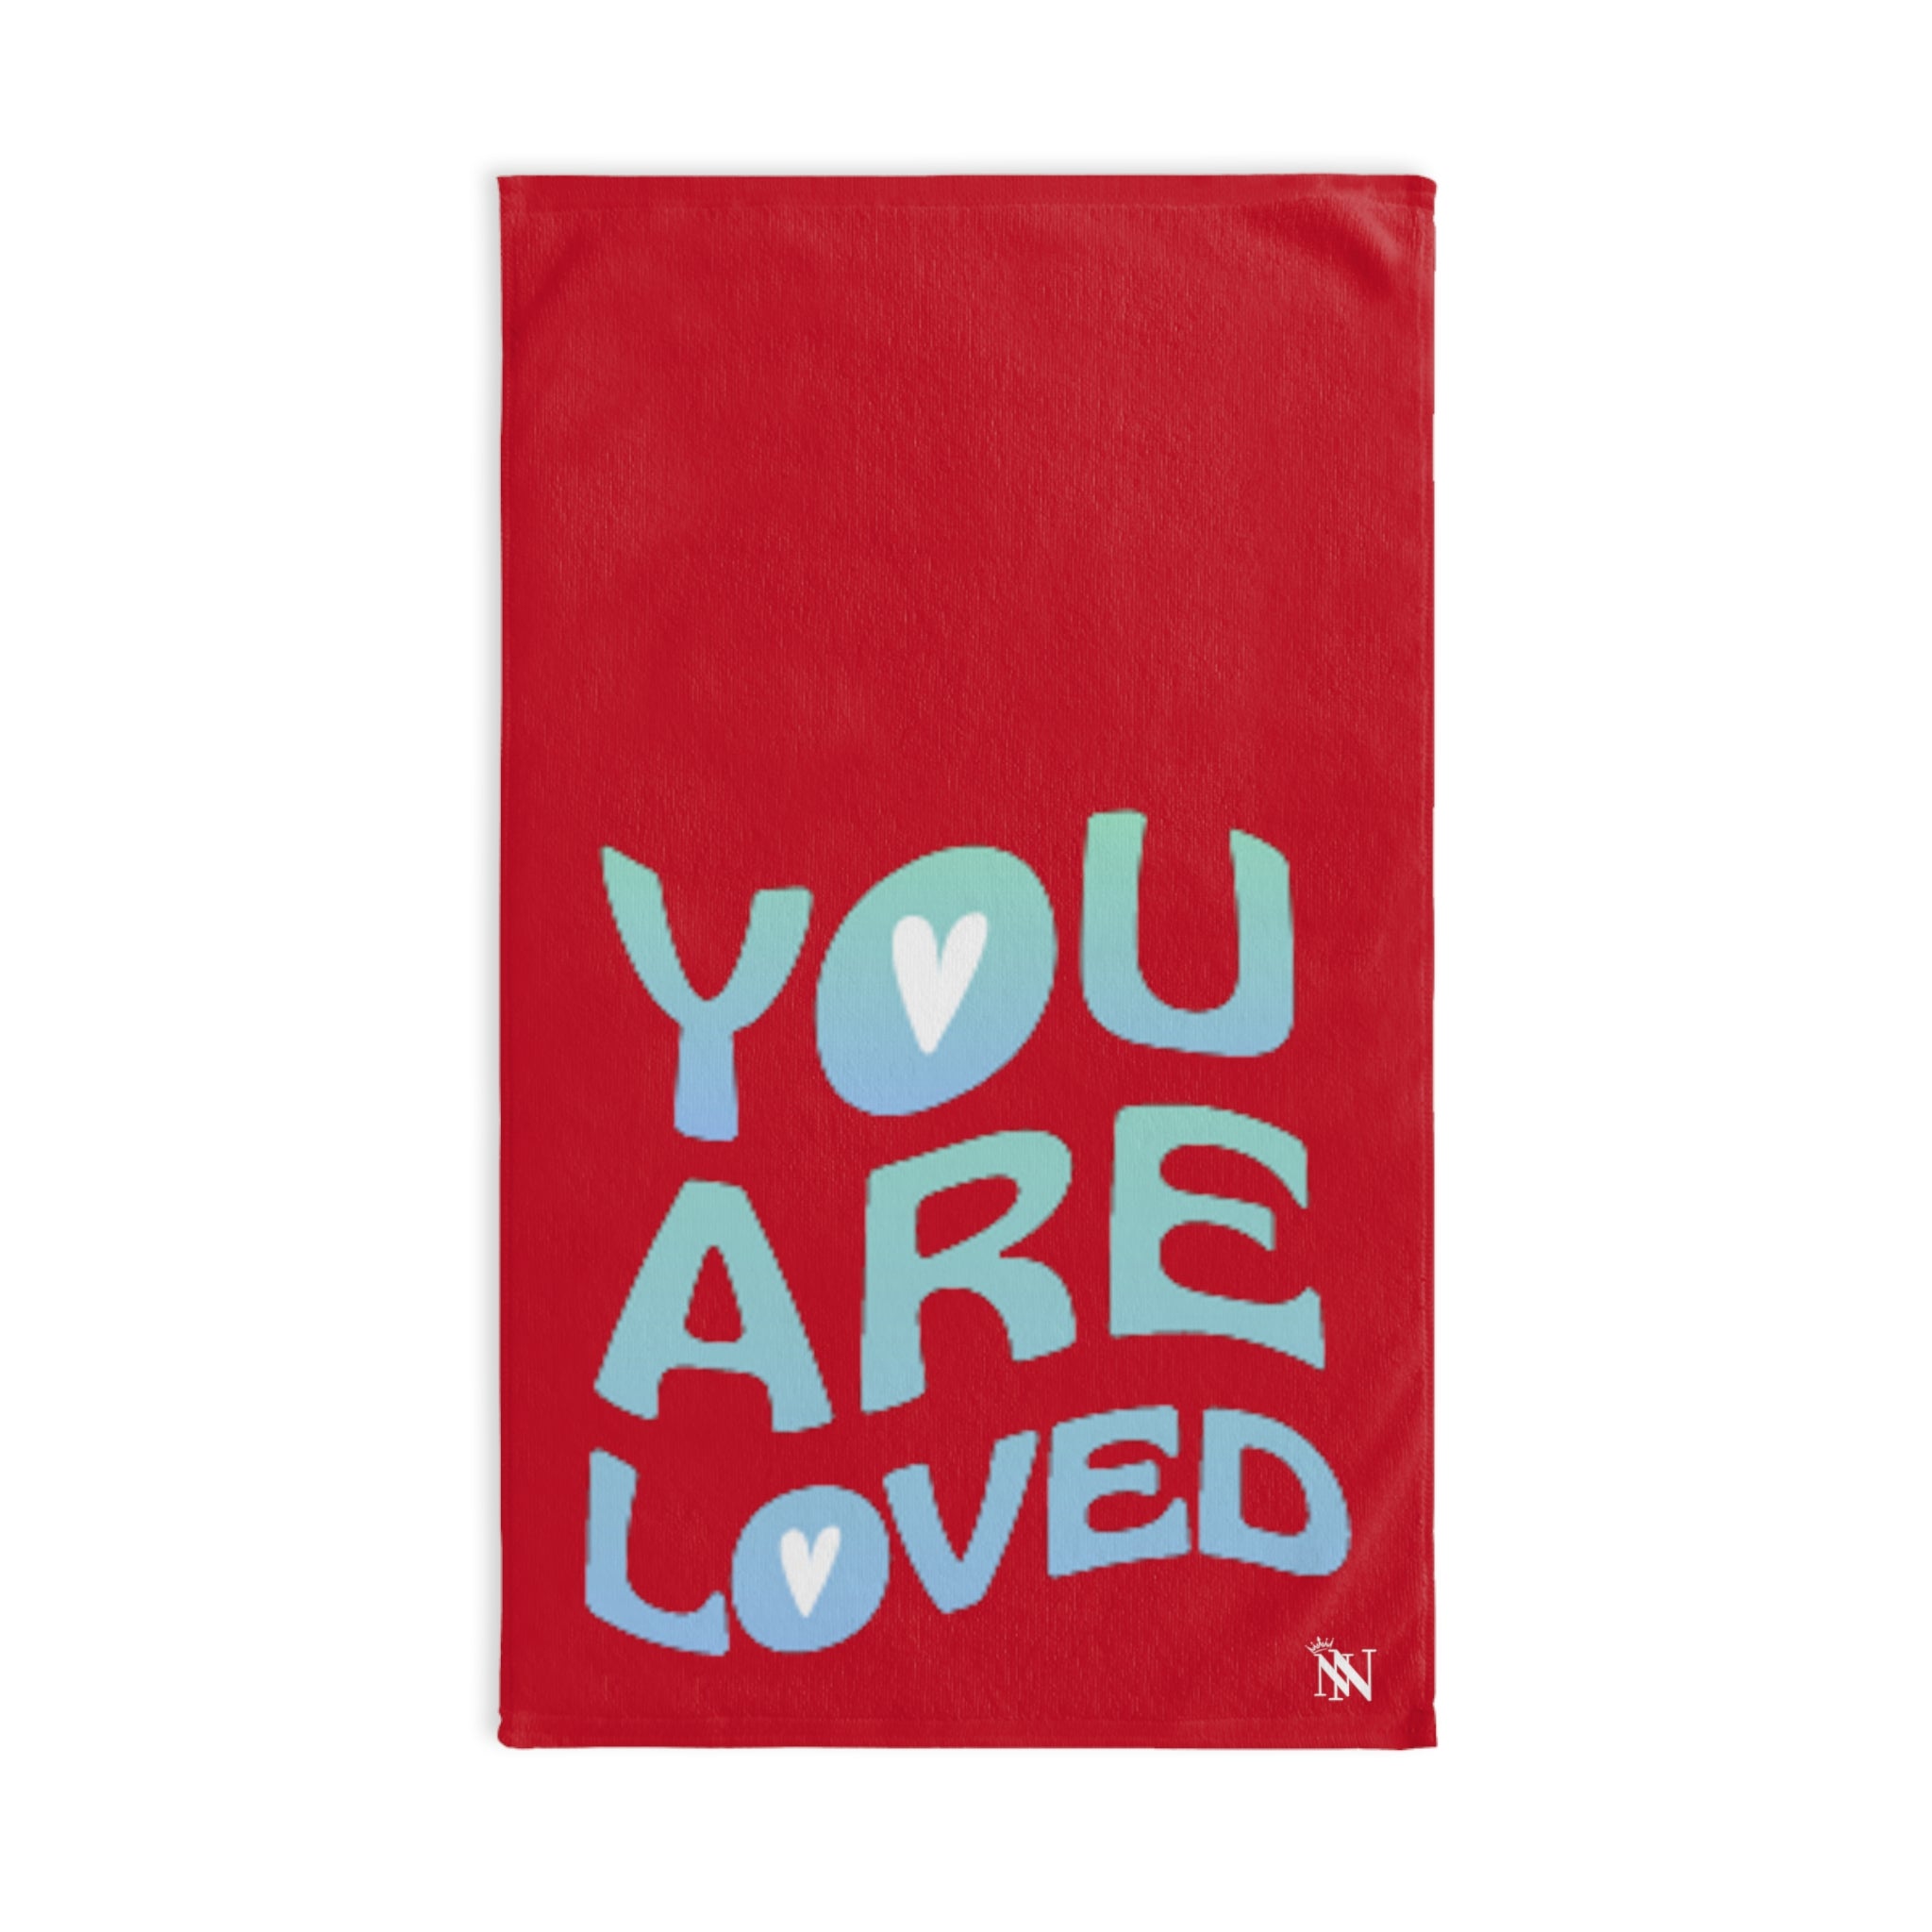 Loved You Are Red | Sexy Gifts for Boyfriend, Funny Towel Romantic Gift for Wedding Couple Fiance First Year 2nd Anniversary Valentines, Party Gag Gifts, Joke Humor Cloth for Husband Men BF NECTAR NAPKINS